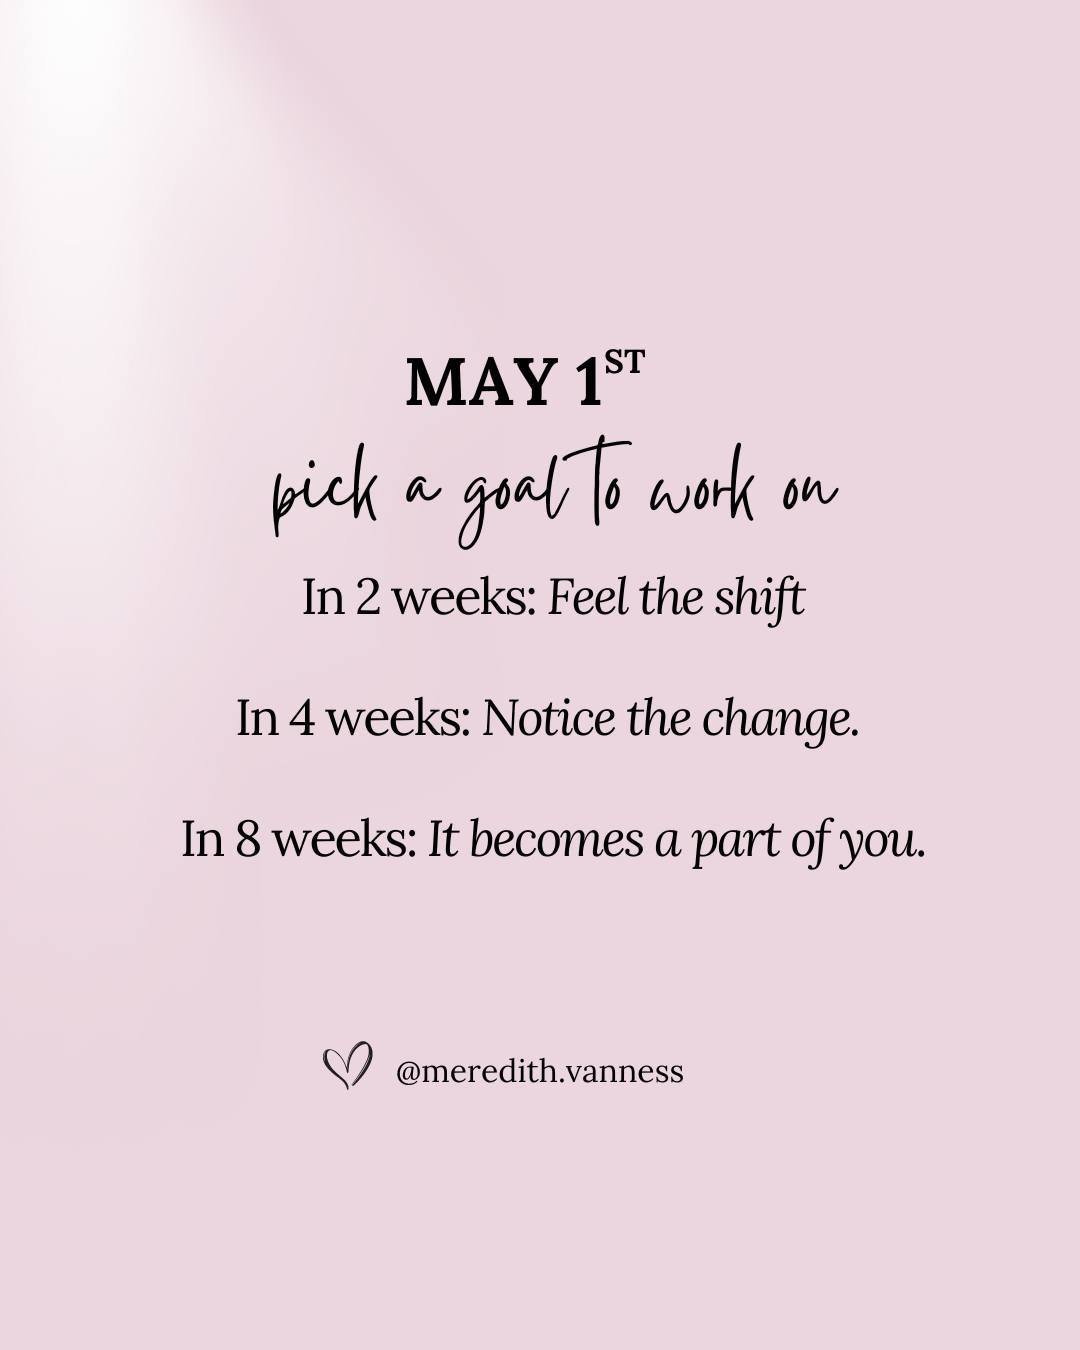 May 1st: A new month, a fresh start! It's also Day 1 of my FREE SPRING RESET SELF-CARE CHALLENGE - the perfect time to start focusing on YOU.⁠
⁠
Start now, see changes in 2 weeks, feel the difference in 4 weeks, 8 weeks, and by summer it'll be a part